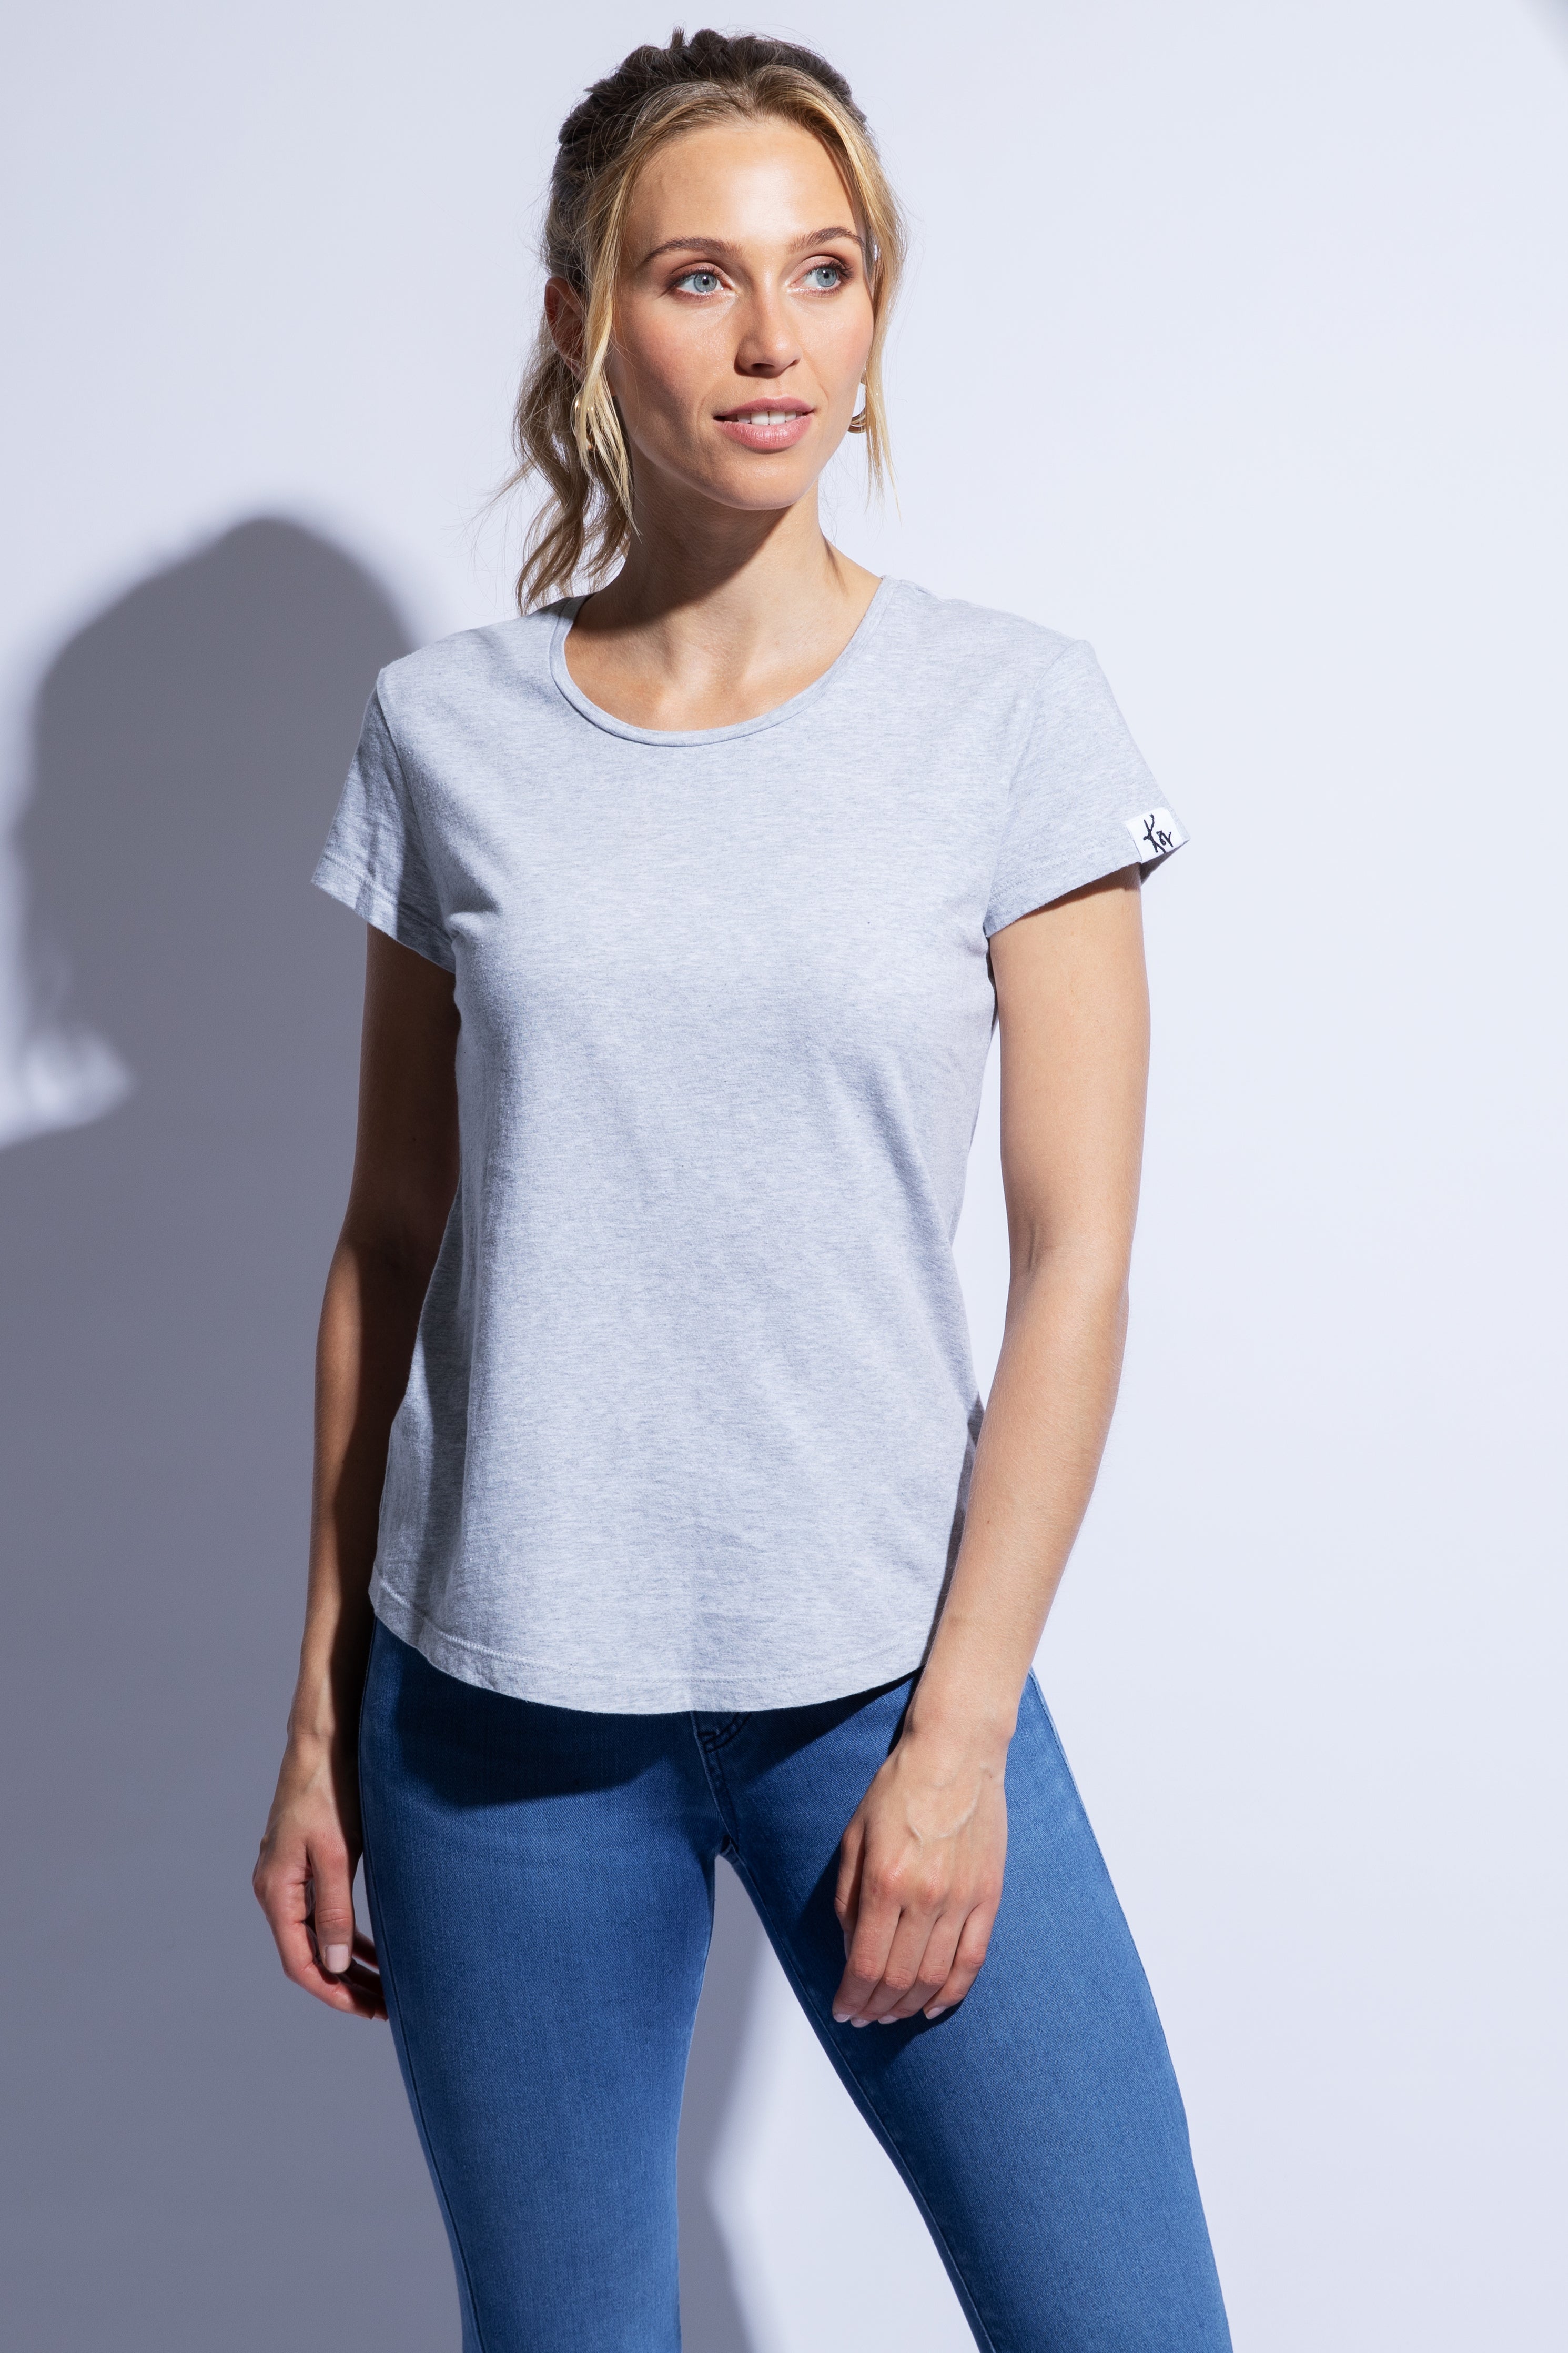 Model wears grey fitted organic cotton t-shirt with rounded hem